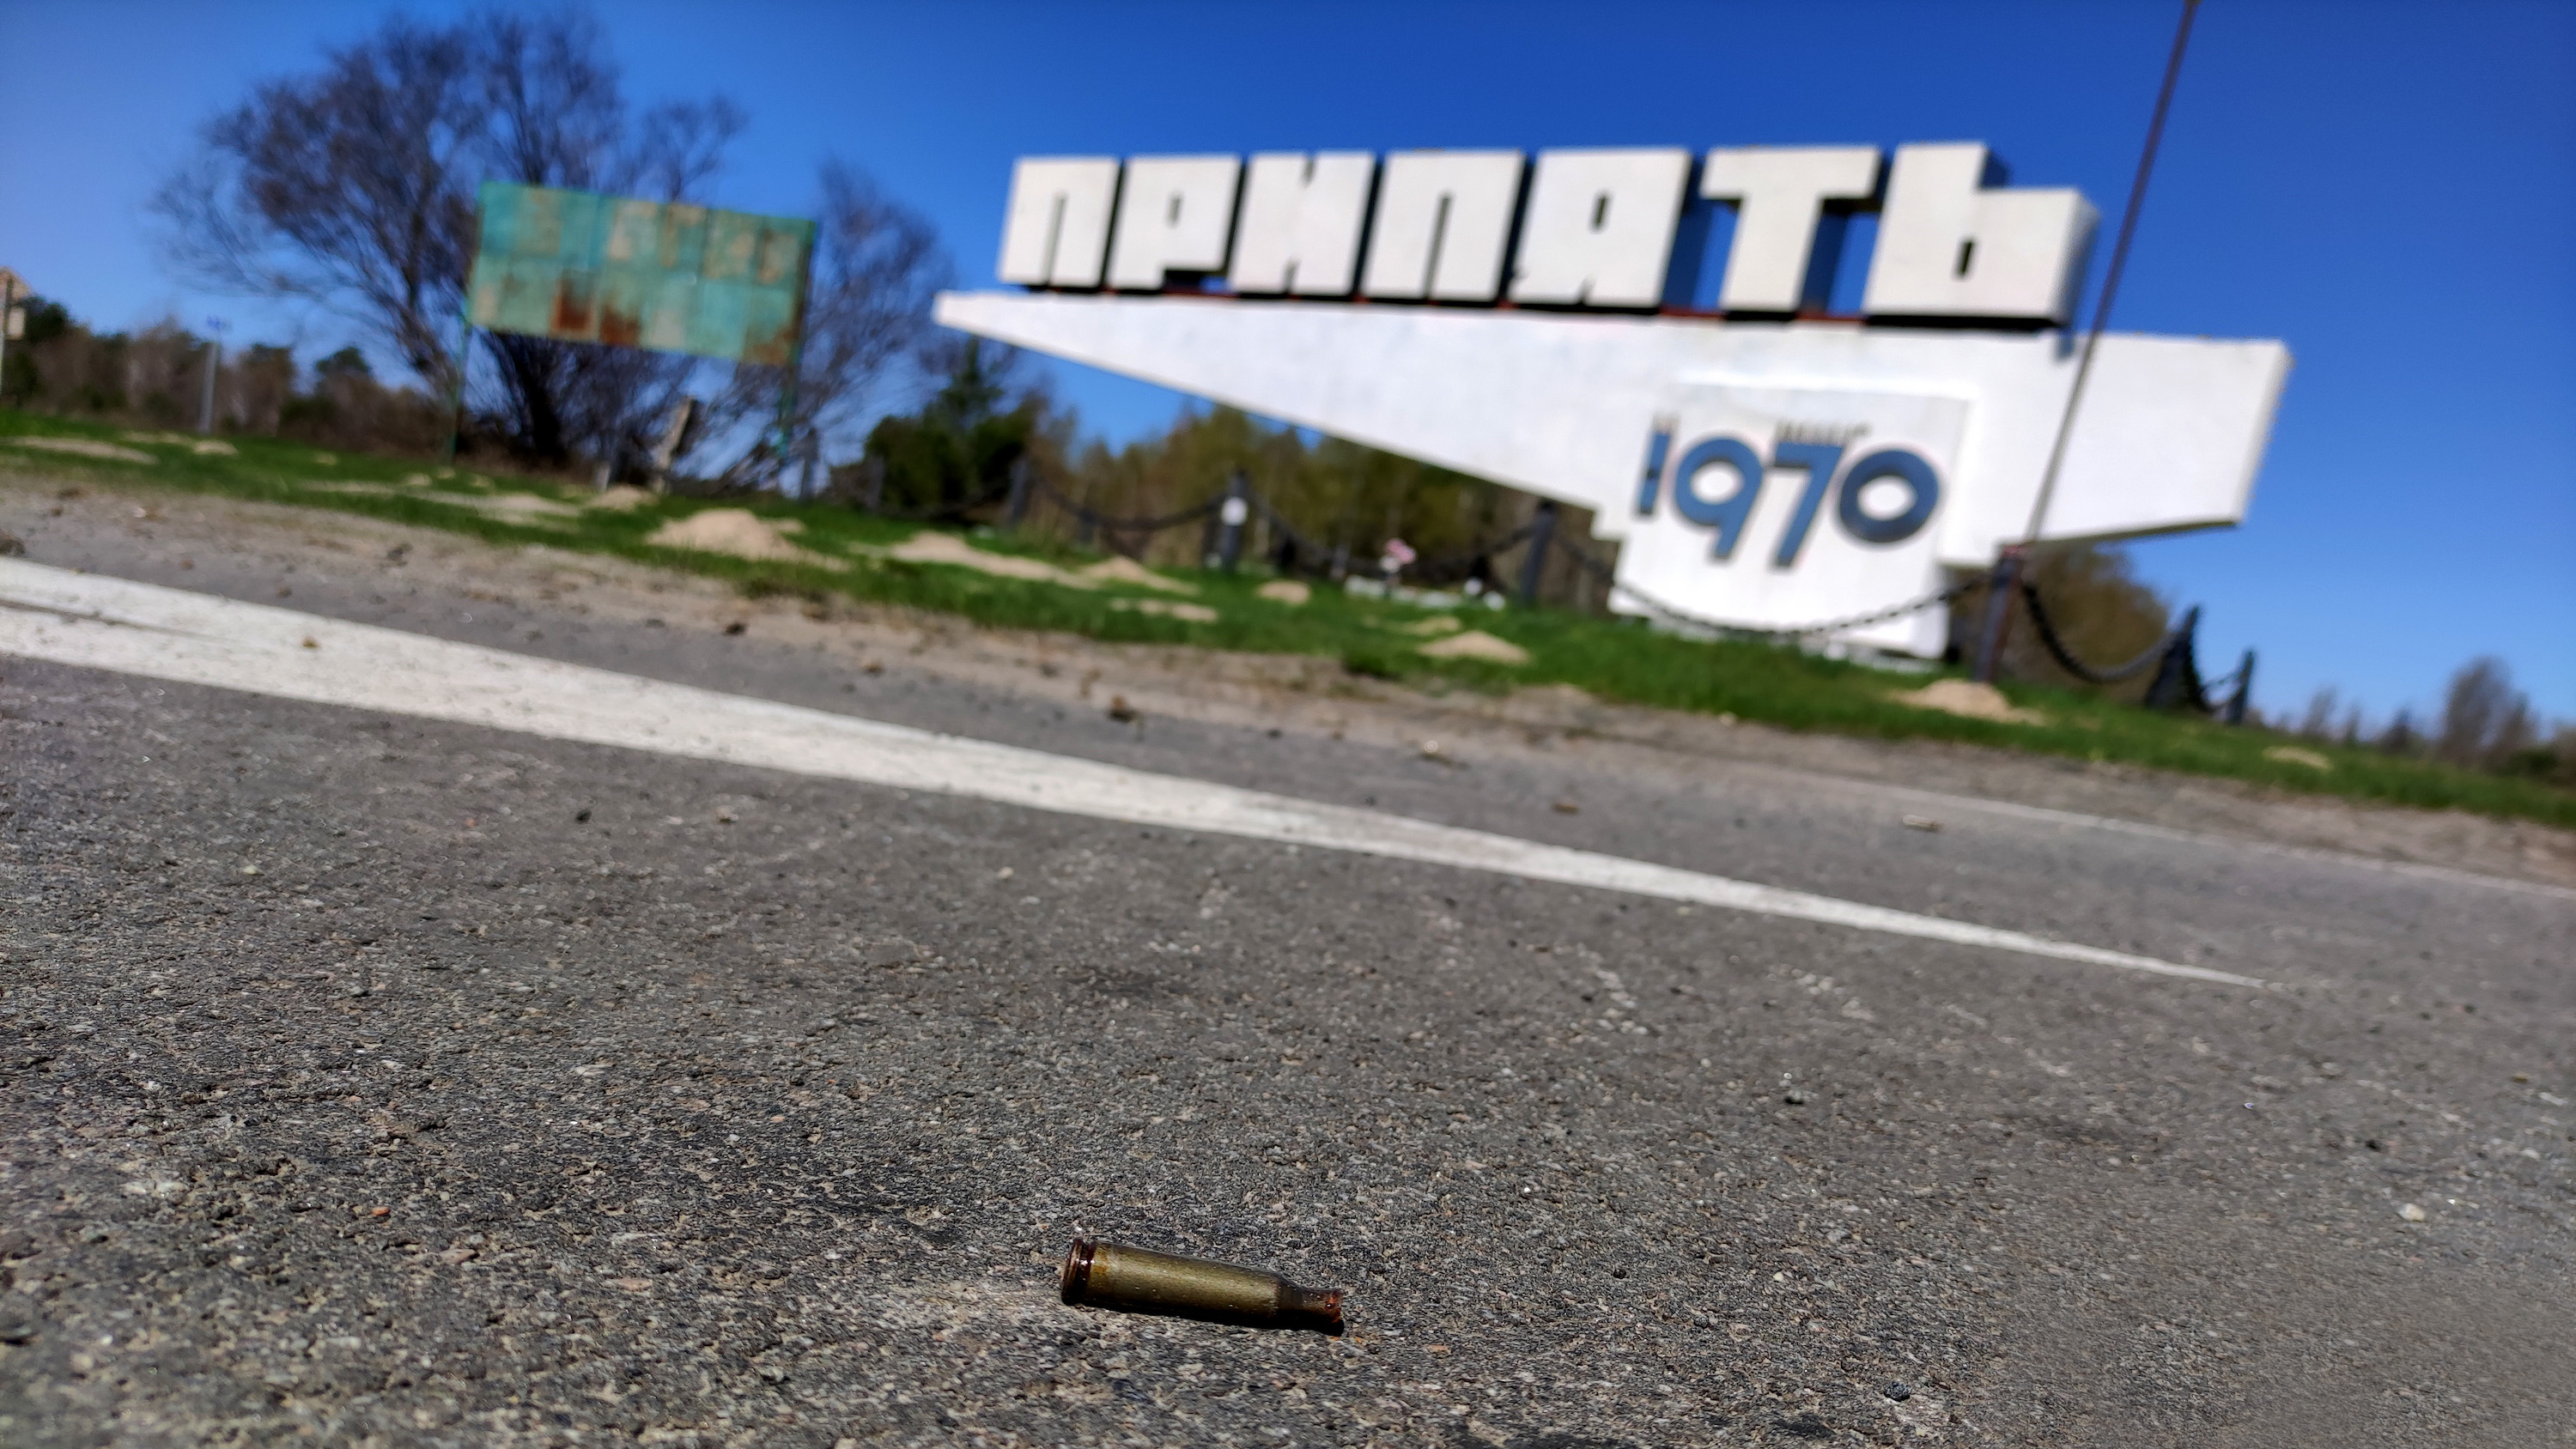 A spent bullet cartridge lies on the asphalt near the sign that marks the limits of the ghost town of Prypiat. The area was the scene of intense fighting during the first days of Russia's invasion of Ukraine.